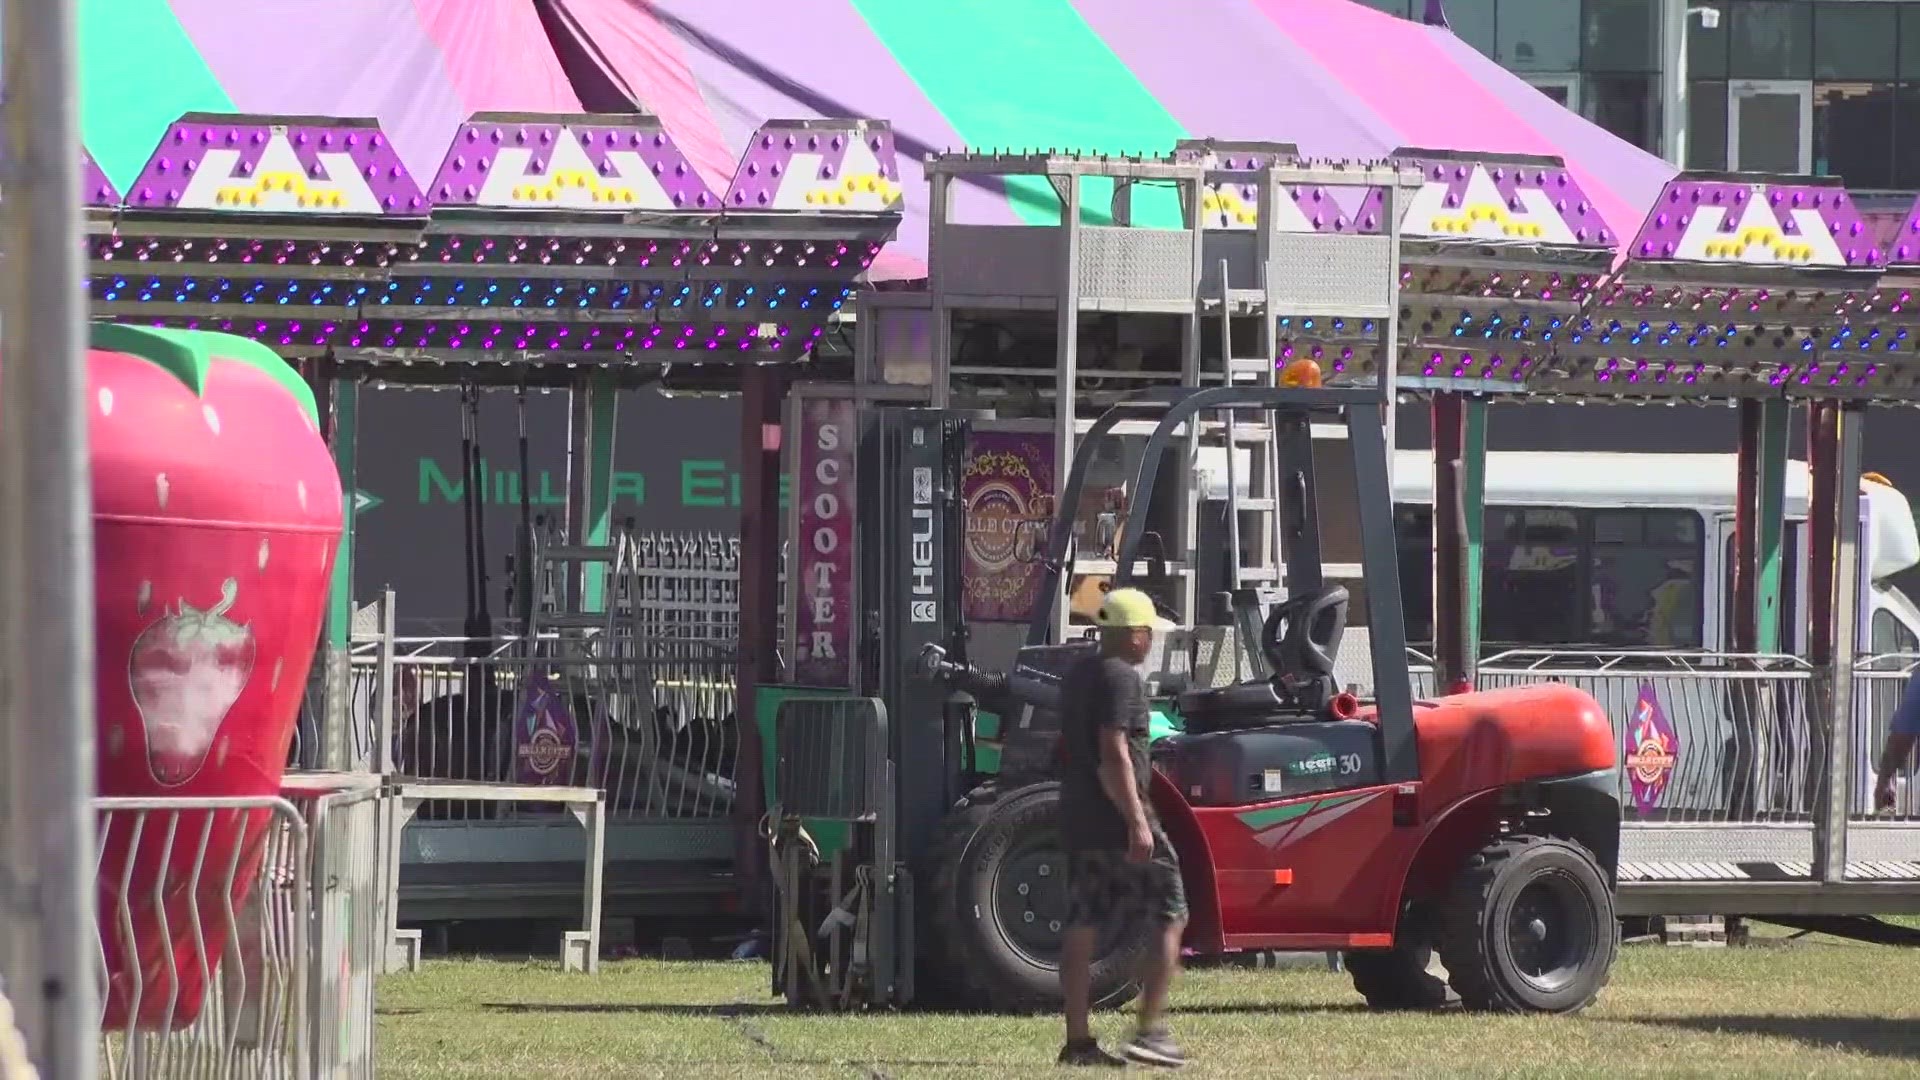 The 68th Annual Greater Jacksonville Agricultural Fair will kick off Thursday, Nov. 2 for 11 days of fun.